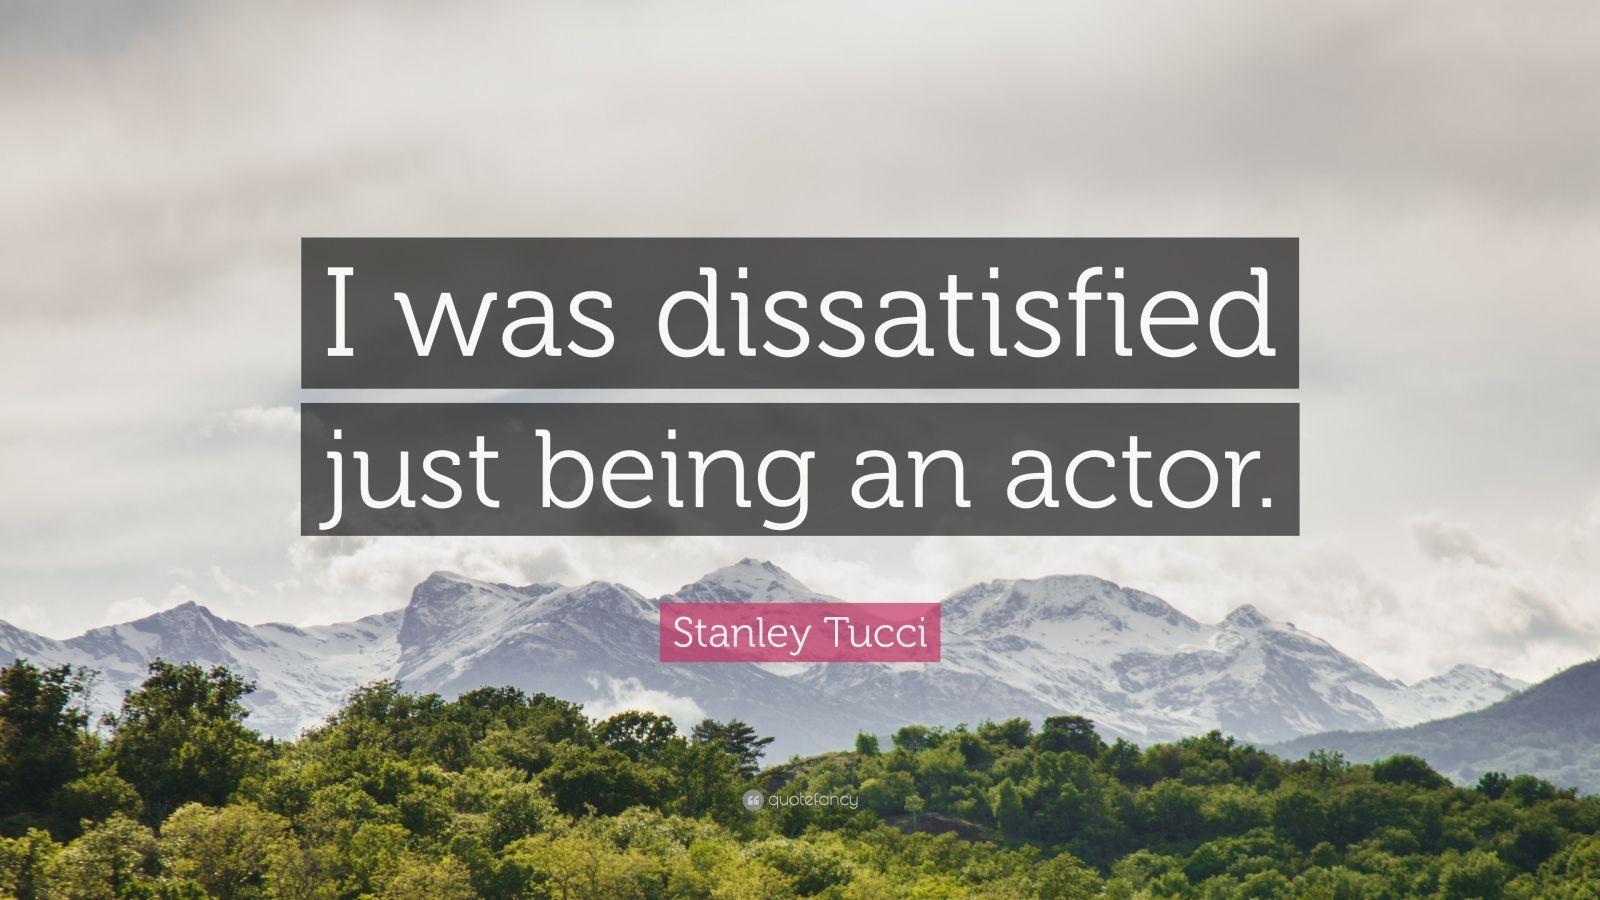 Stanley Tucci Quote: “I was dissatisfied just being an actor.” 5